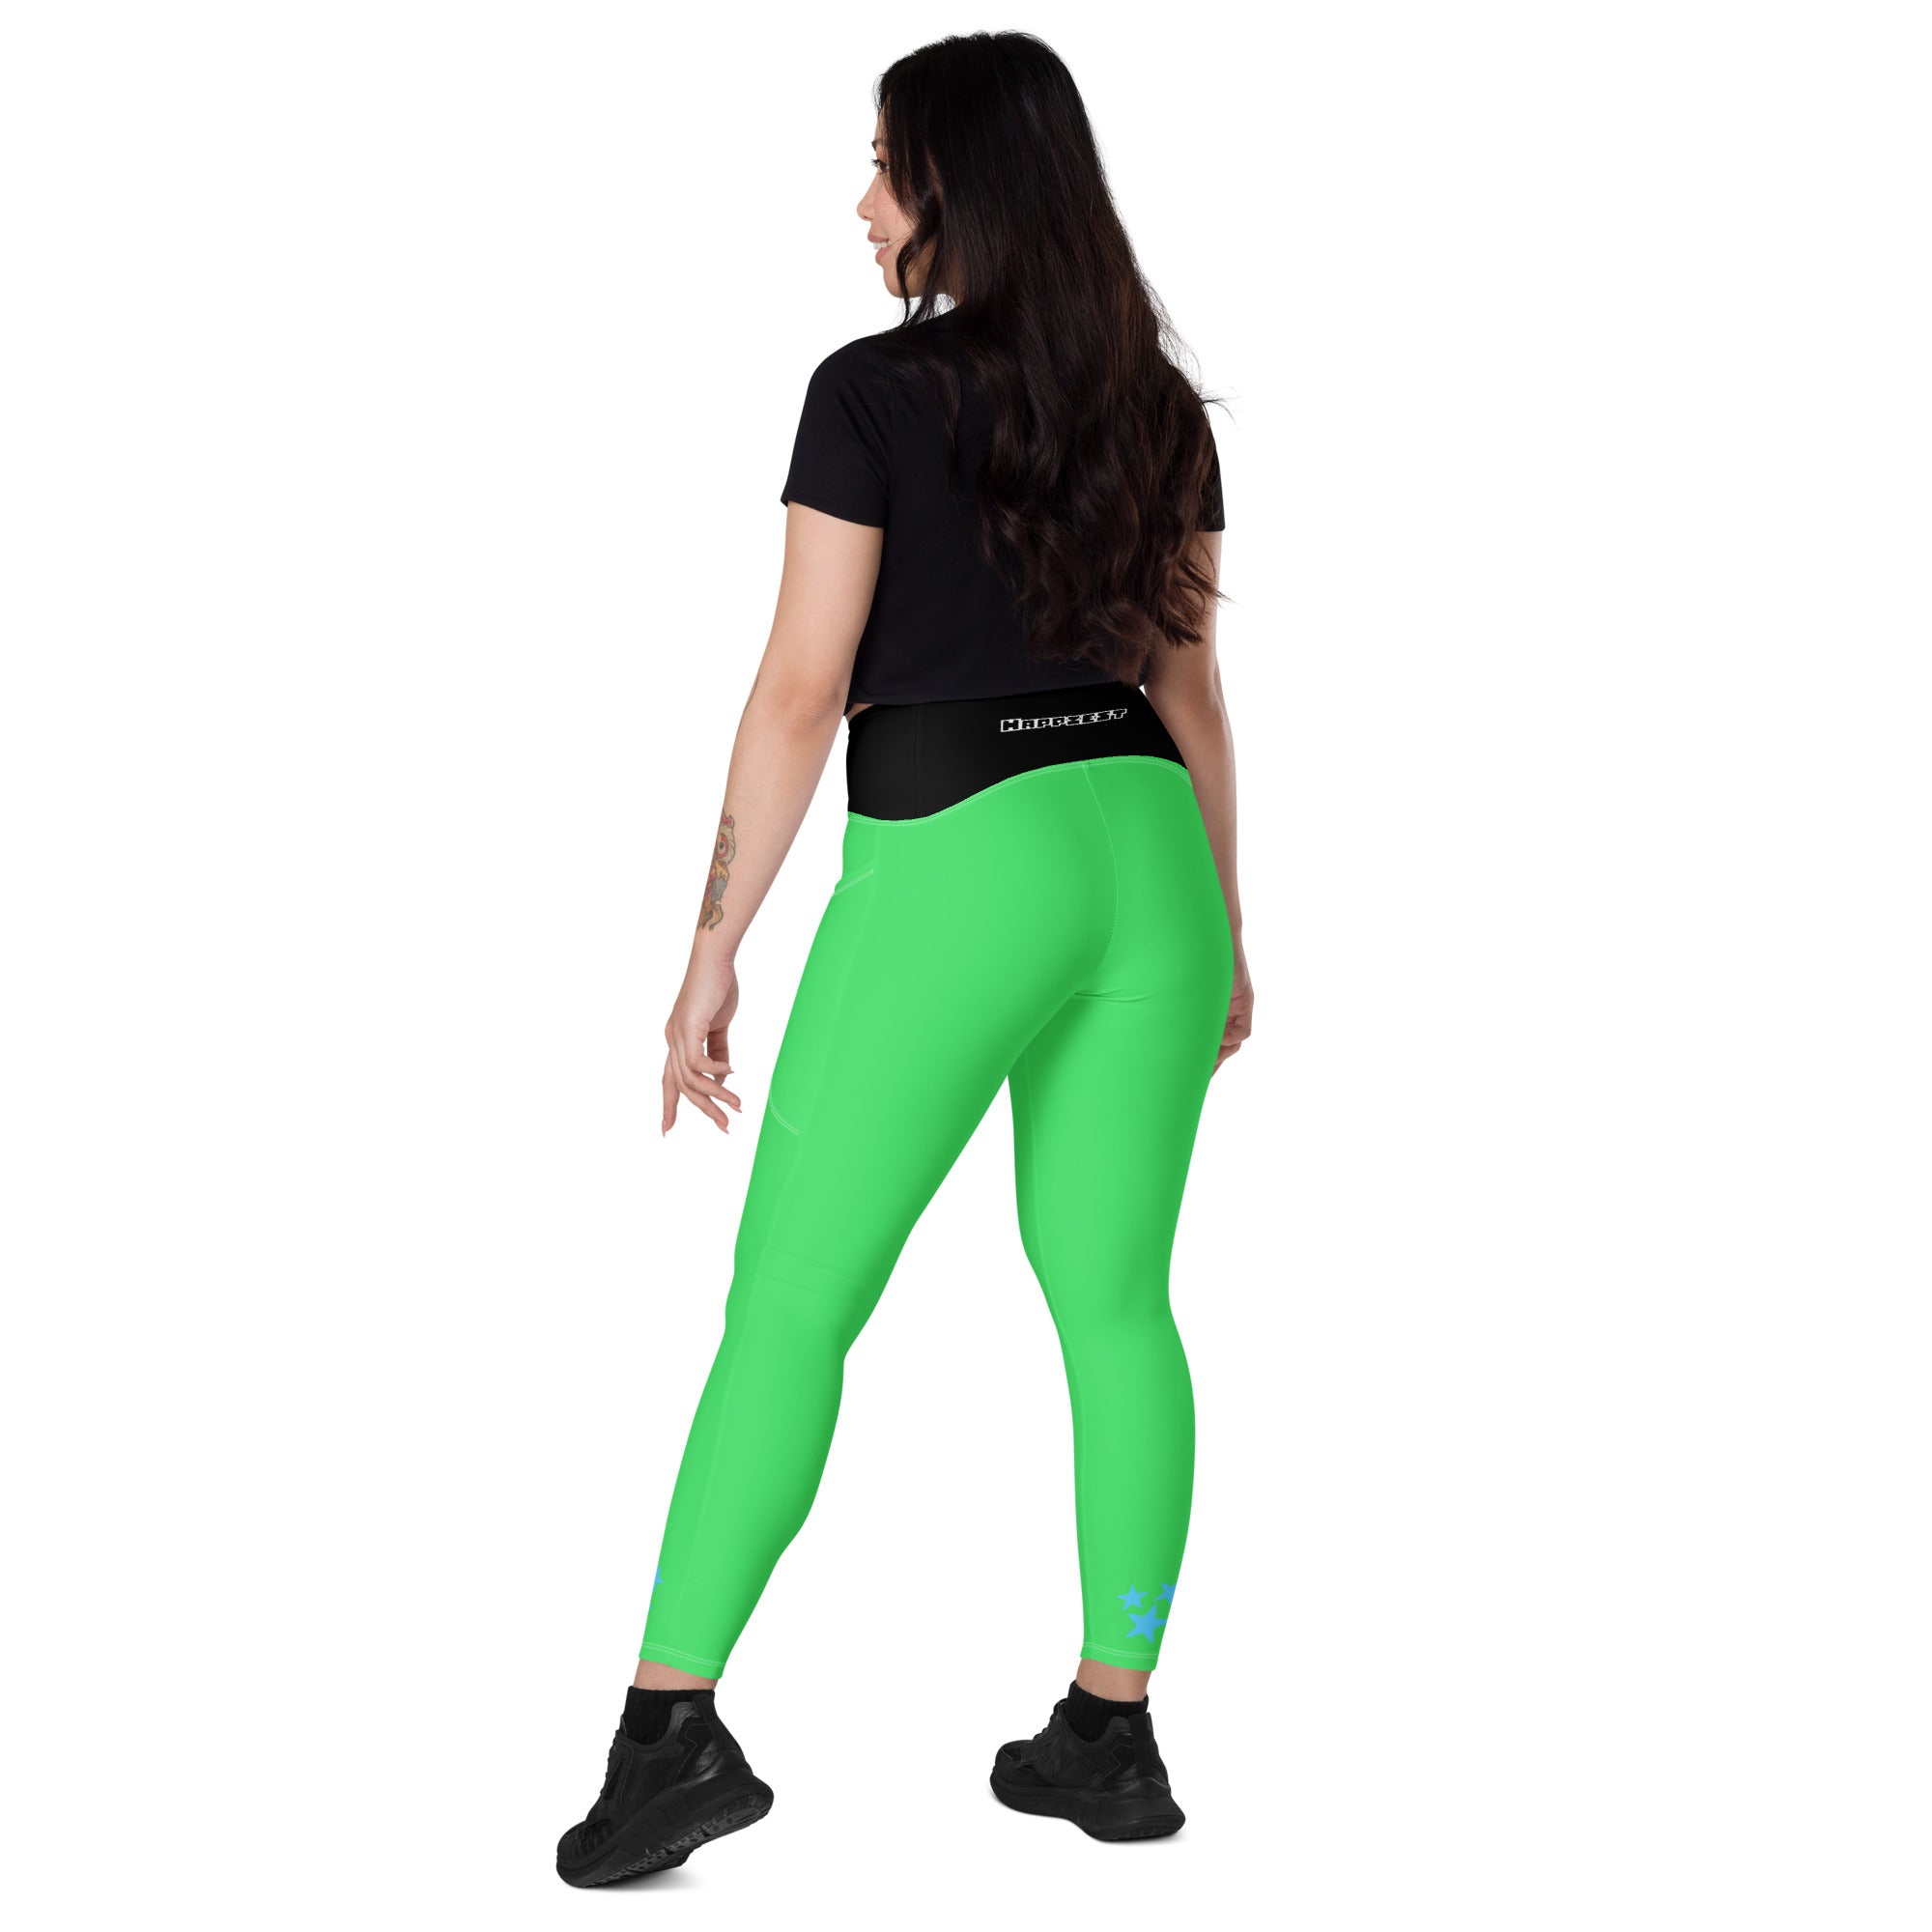 Buttercup Leggings with pockets